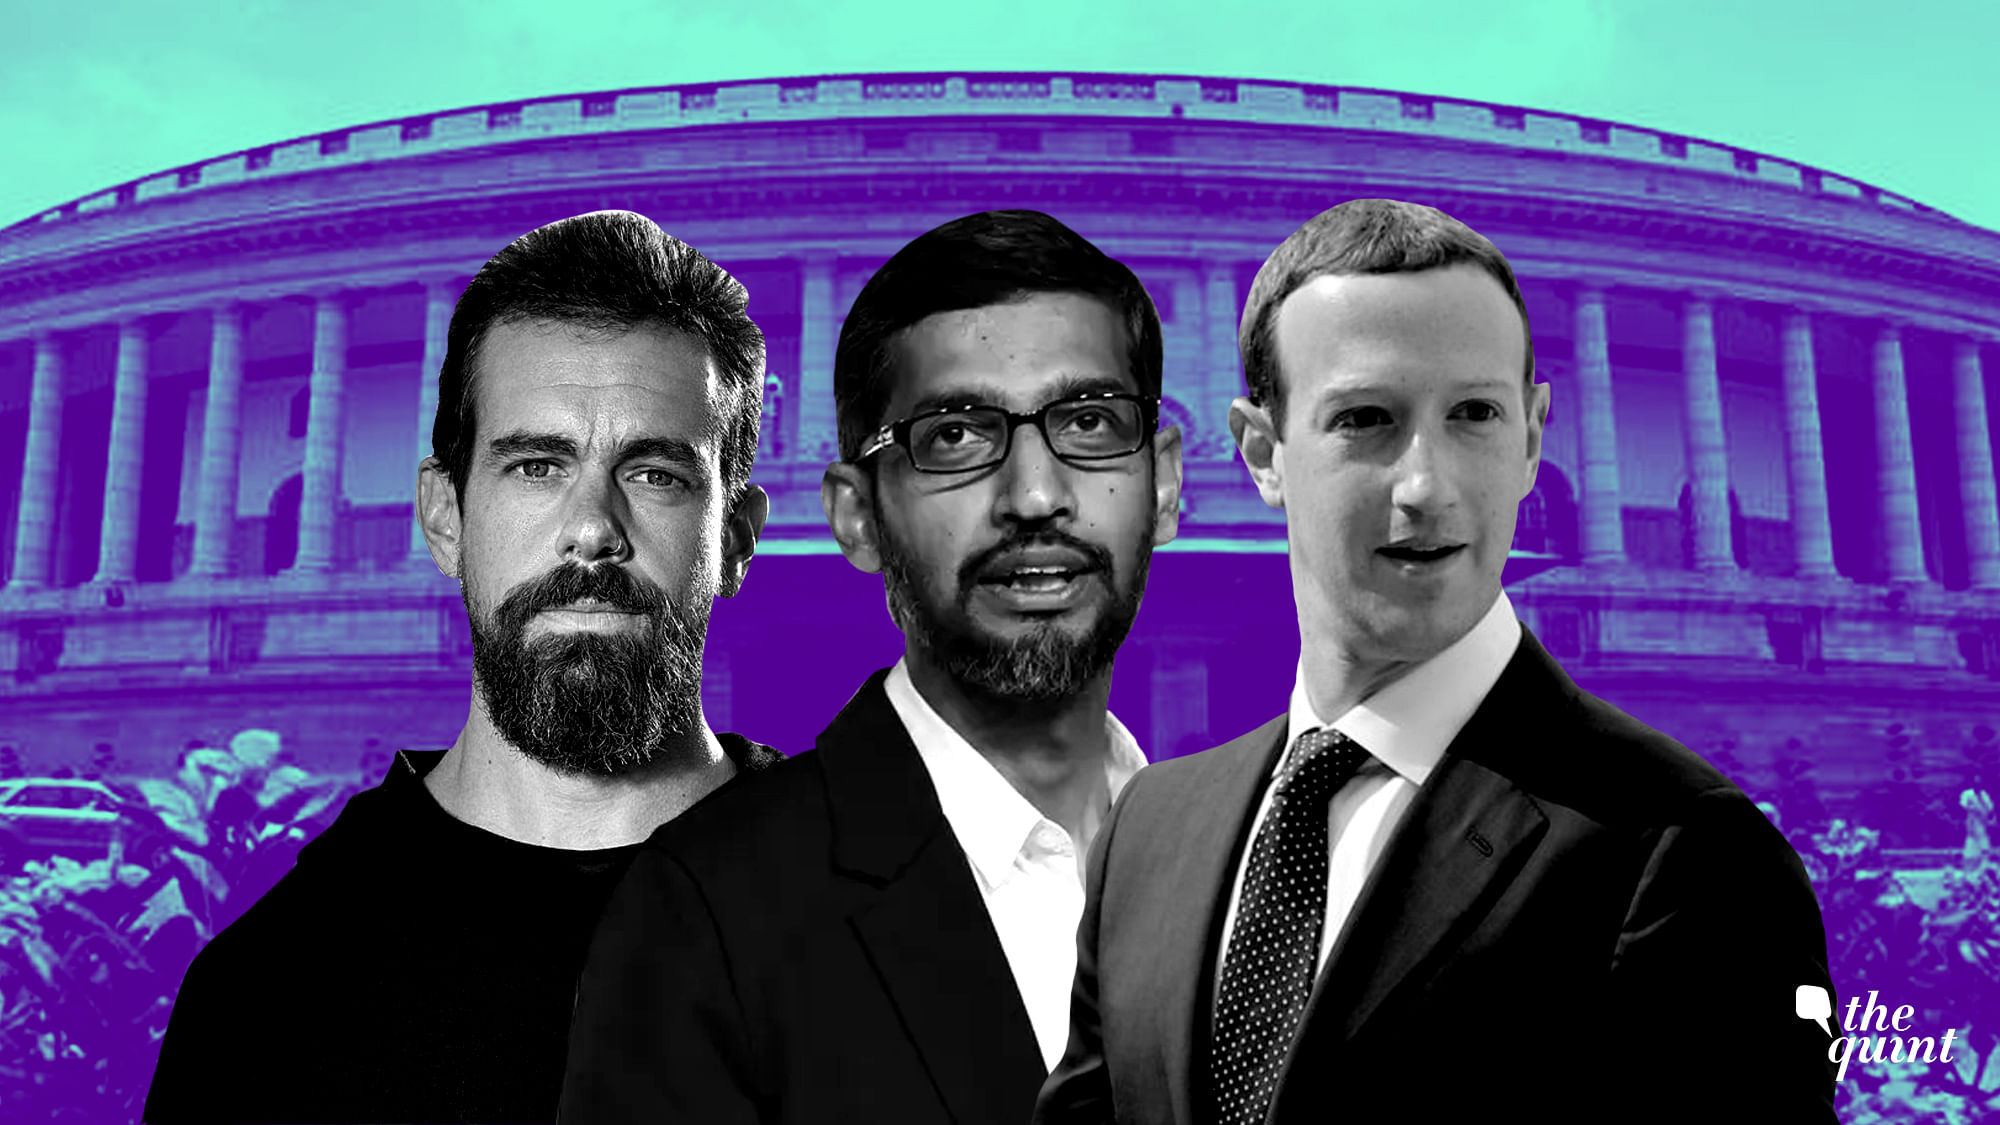 A senior member of the Committee has told The Quint that it wants not just Twitter CEO Jack Dorsey but all the major social media players to appear before it prior to the elections.&nbsp;